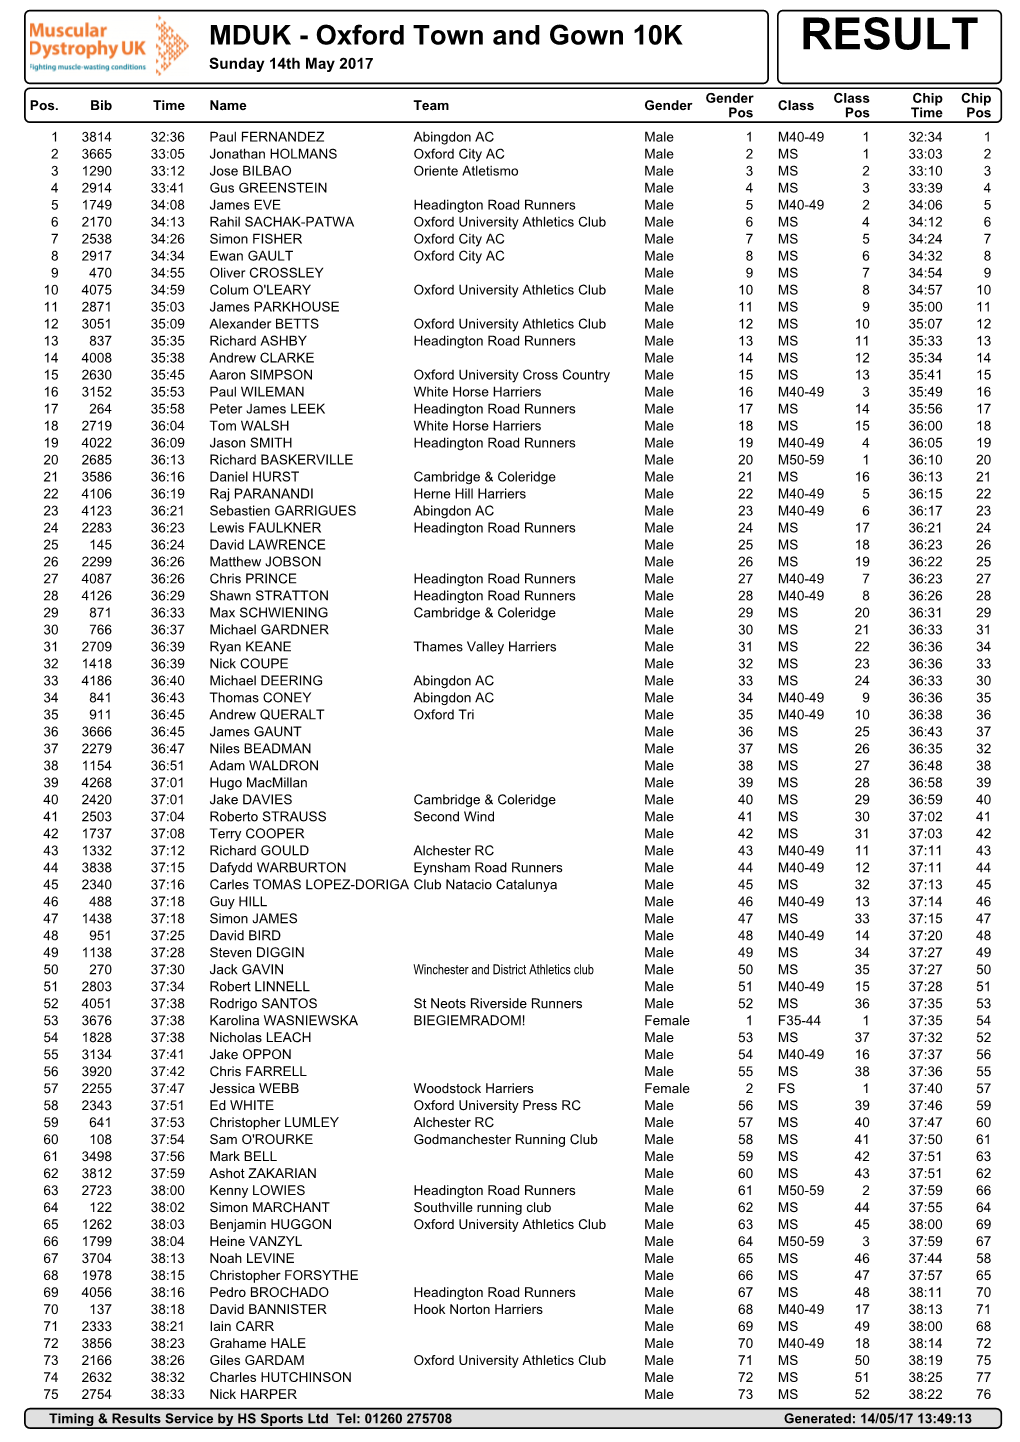 Oxford Town and Gown 10K RESULT Sunday 14Th May 2017